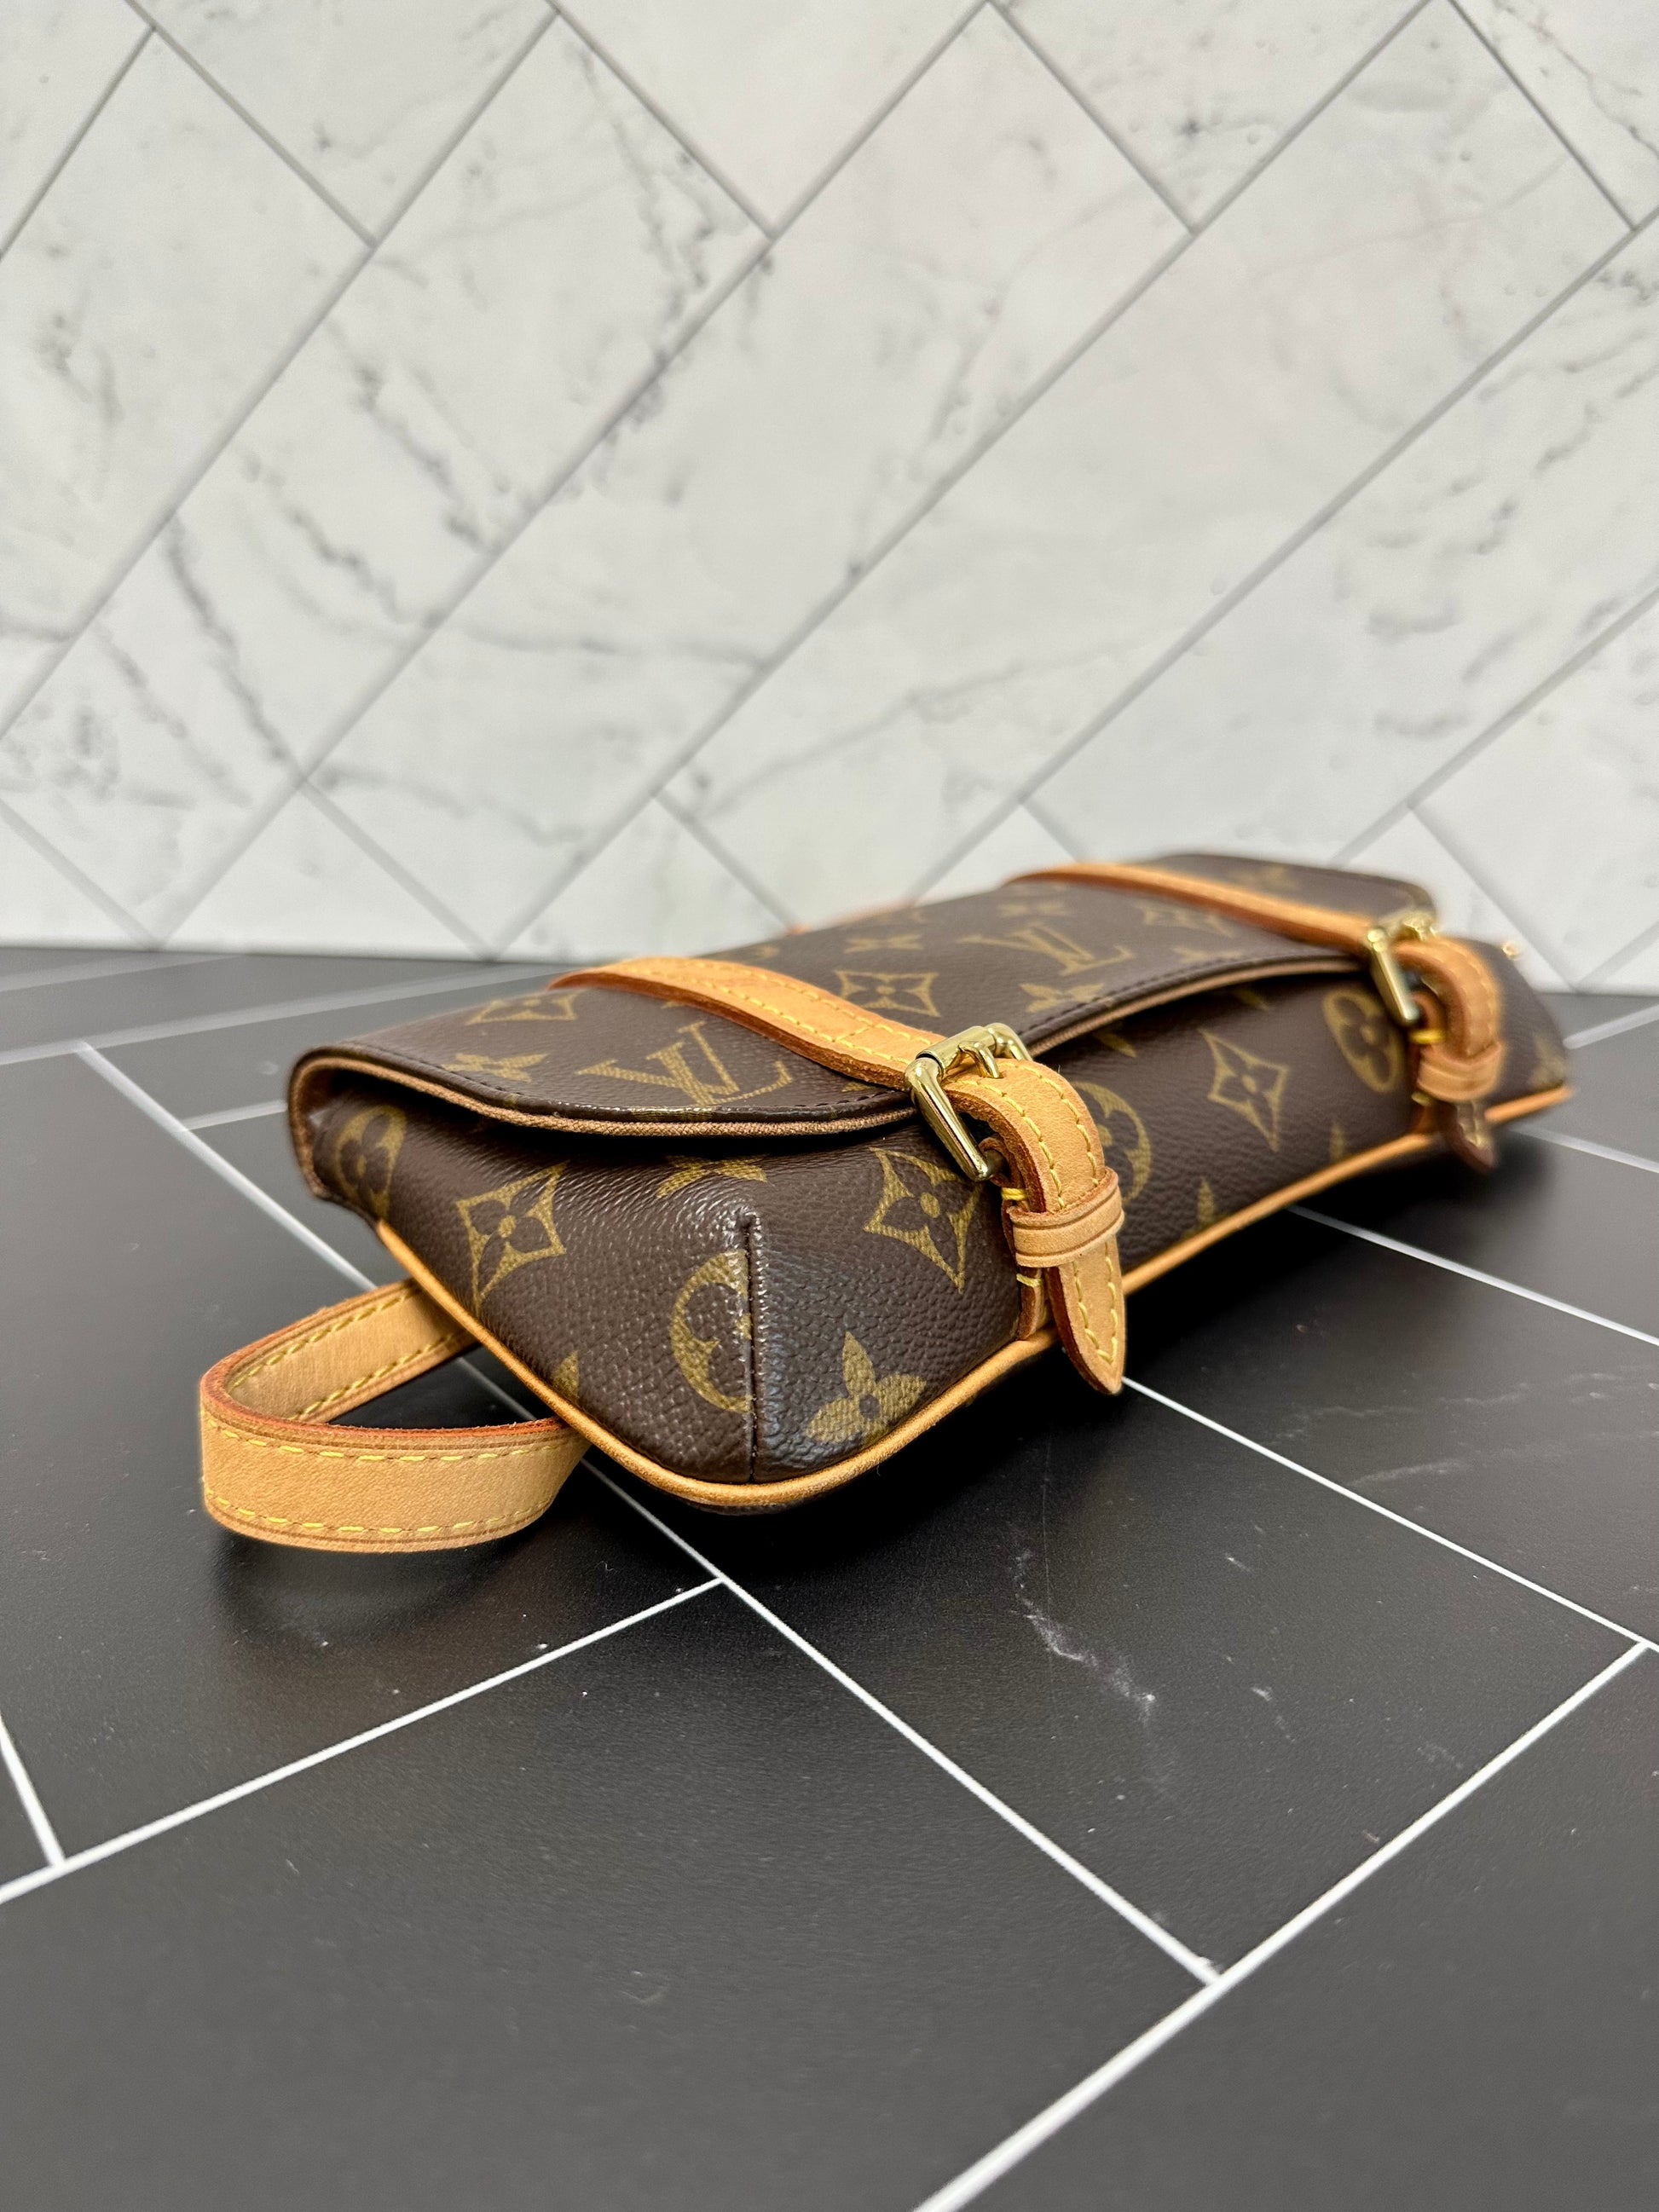 Shop for Louis Vuitton Monogram Canvas Leather Sonatine Bag - Shipped from  USA